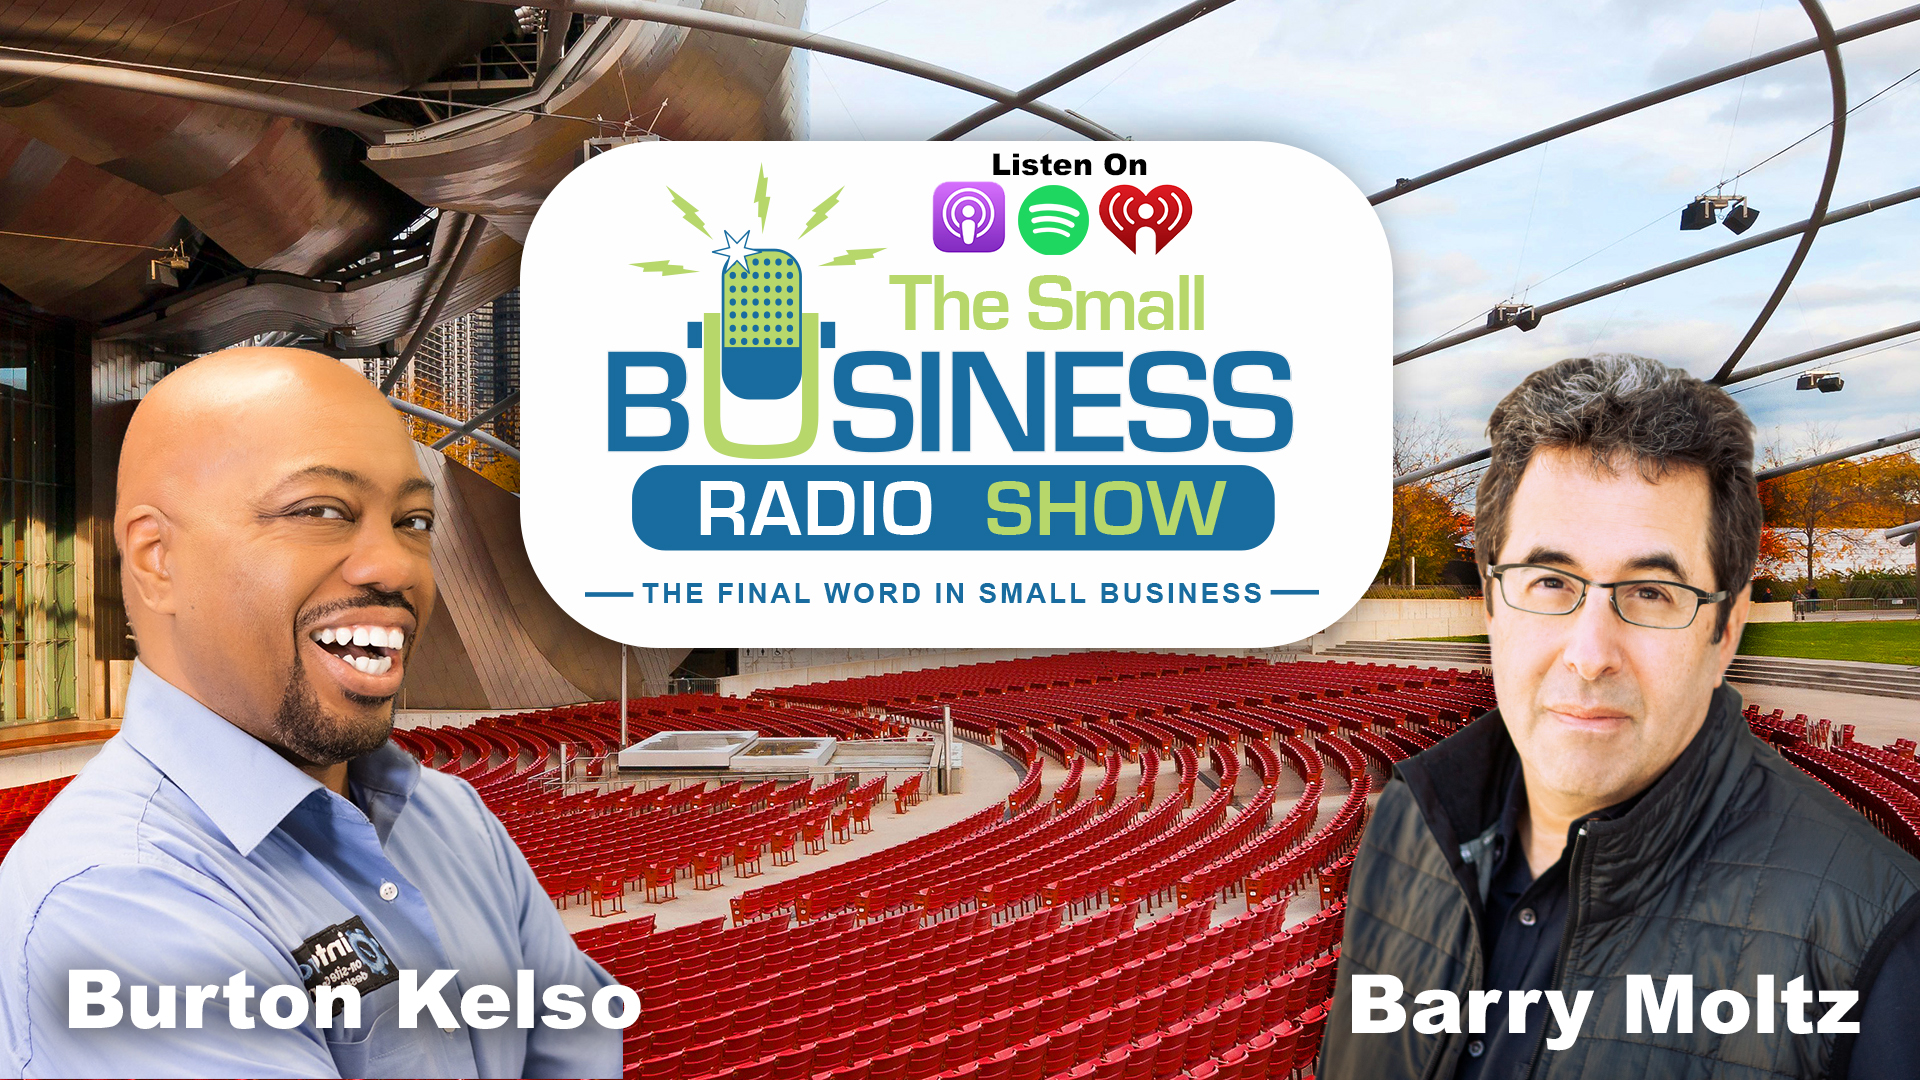 Burton Kelso on The Small Business Radio Show